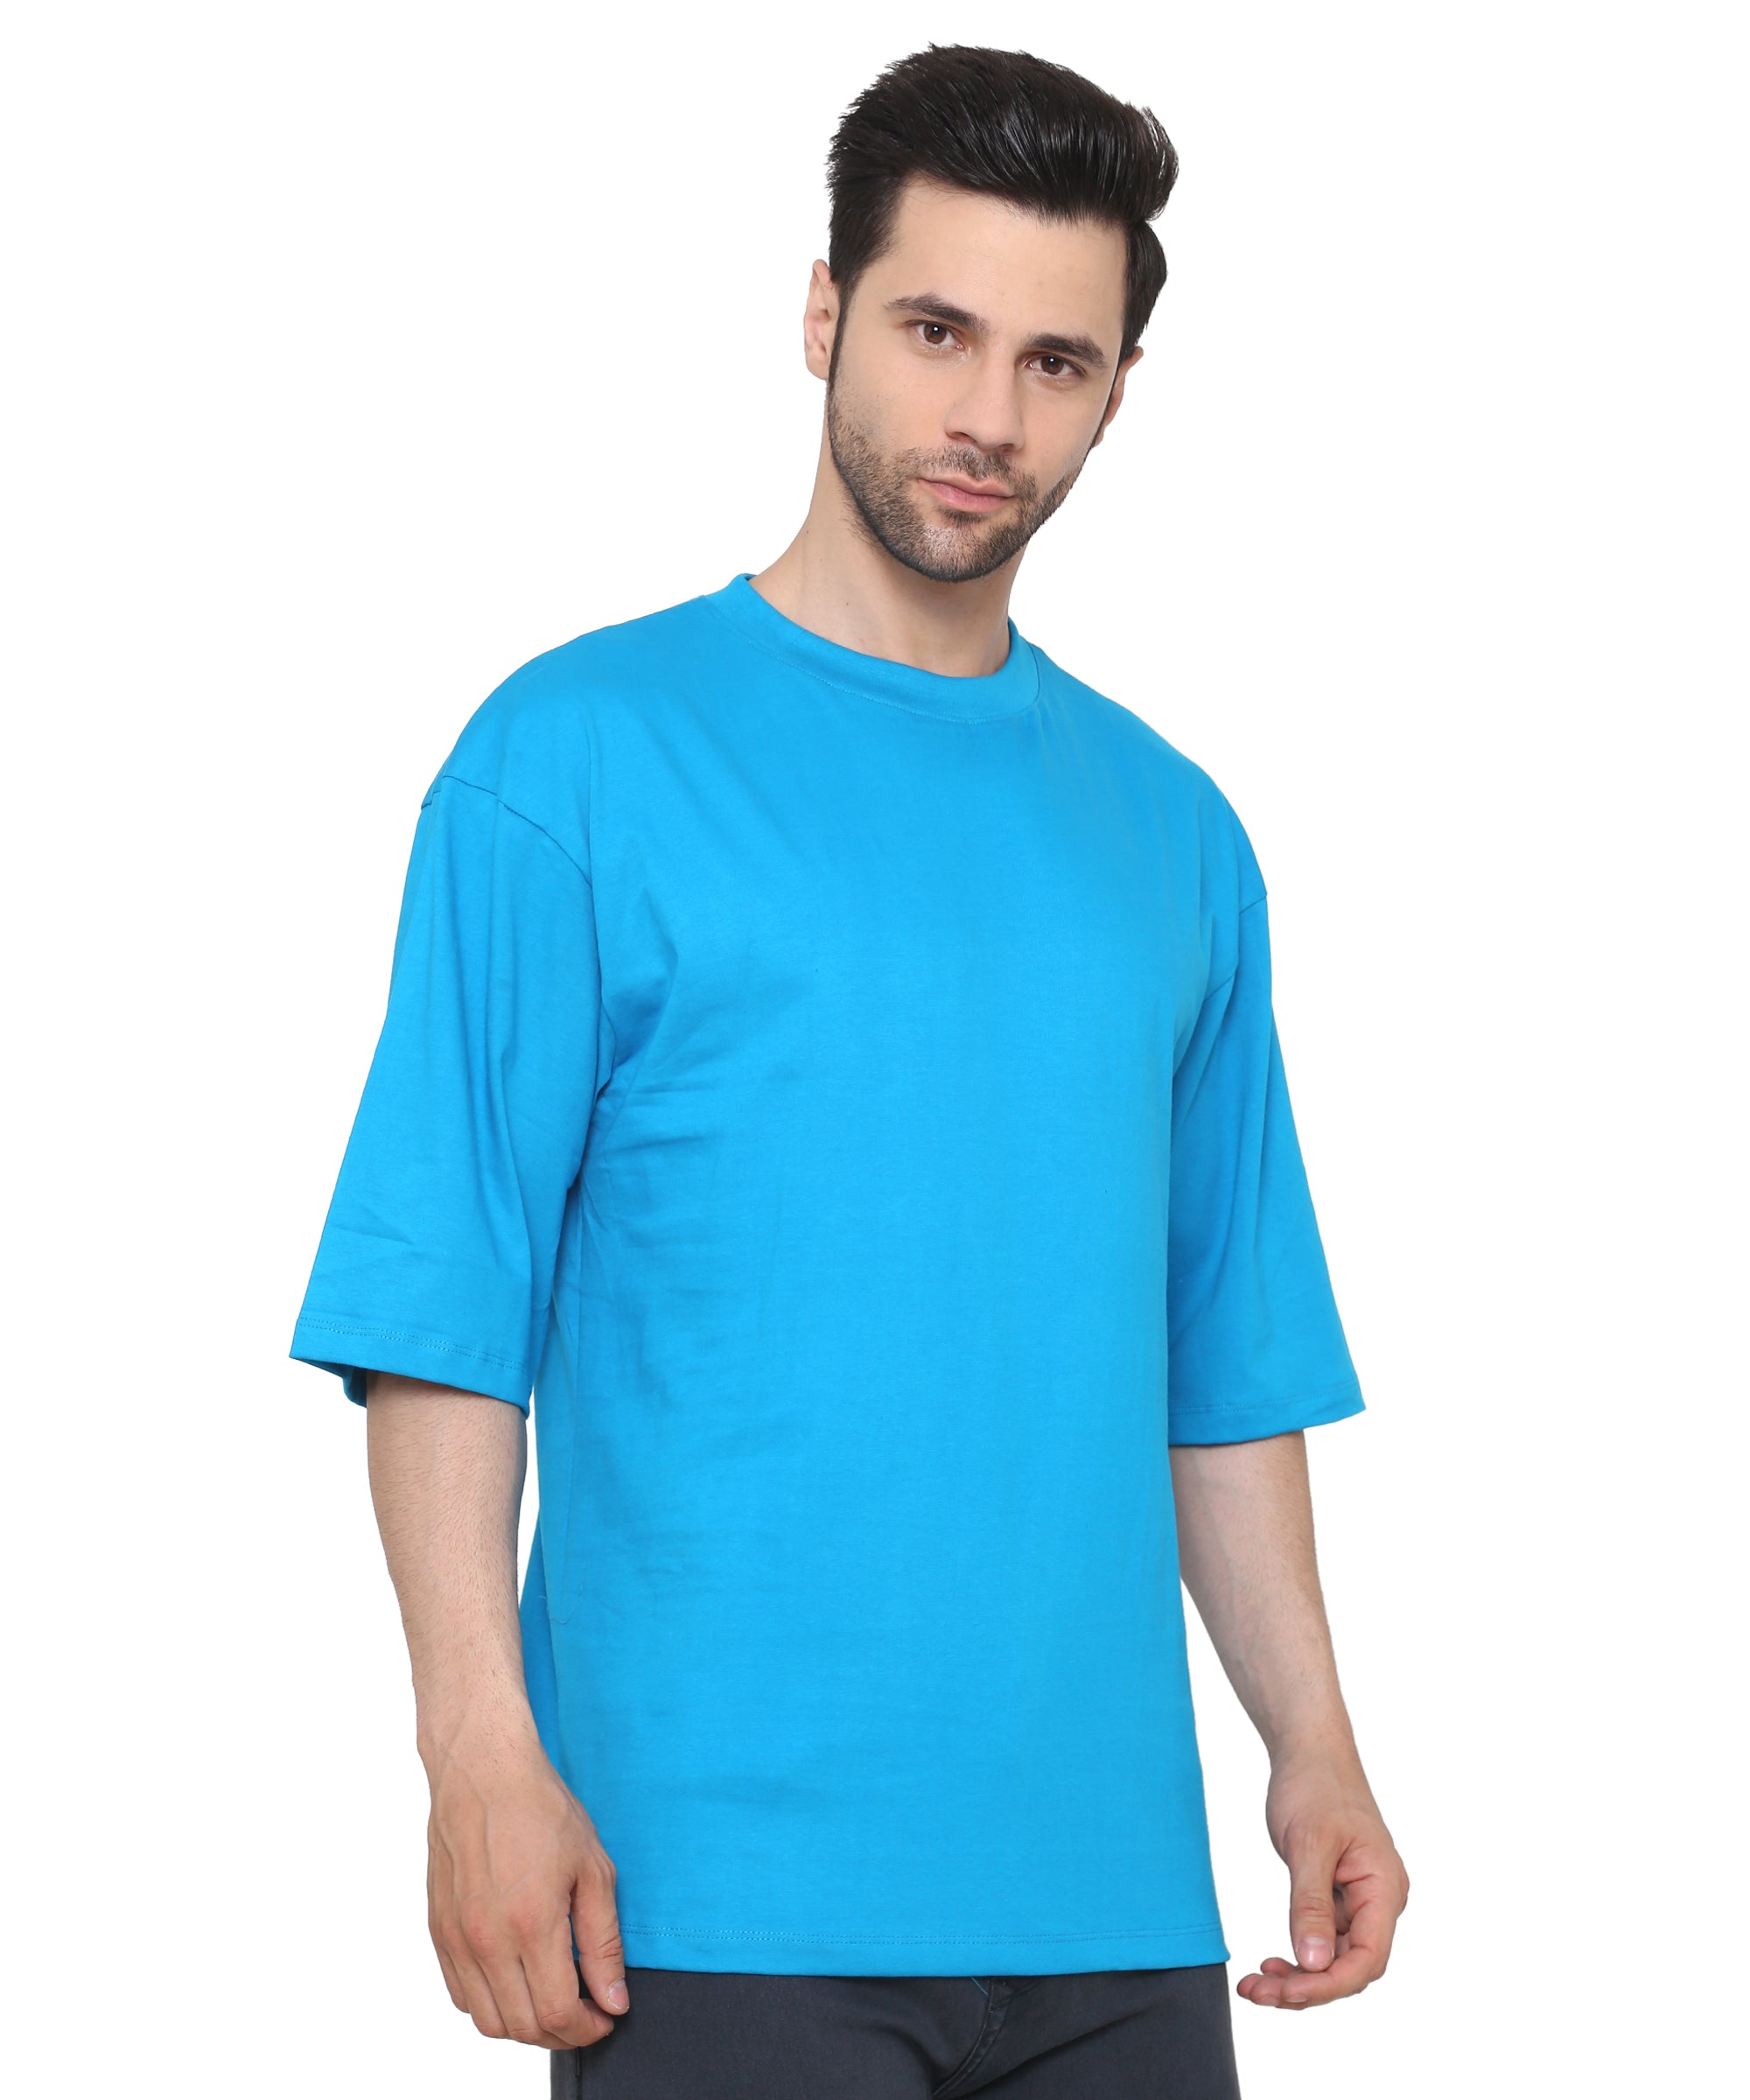 Ball Blue Oversized Cotton T-shirts Relaxed Fit Tees for Men